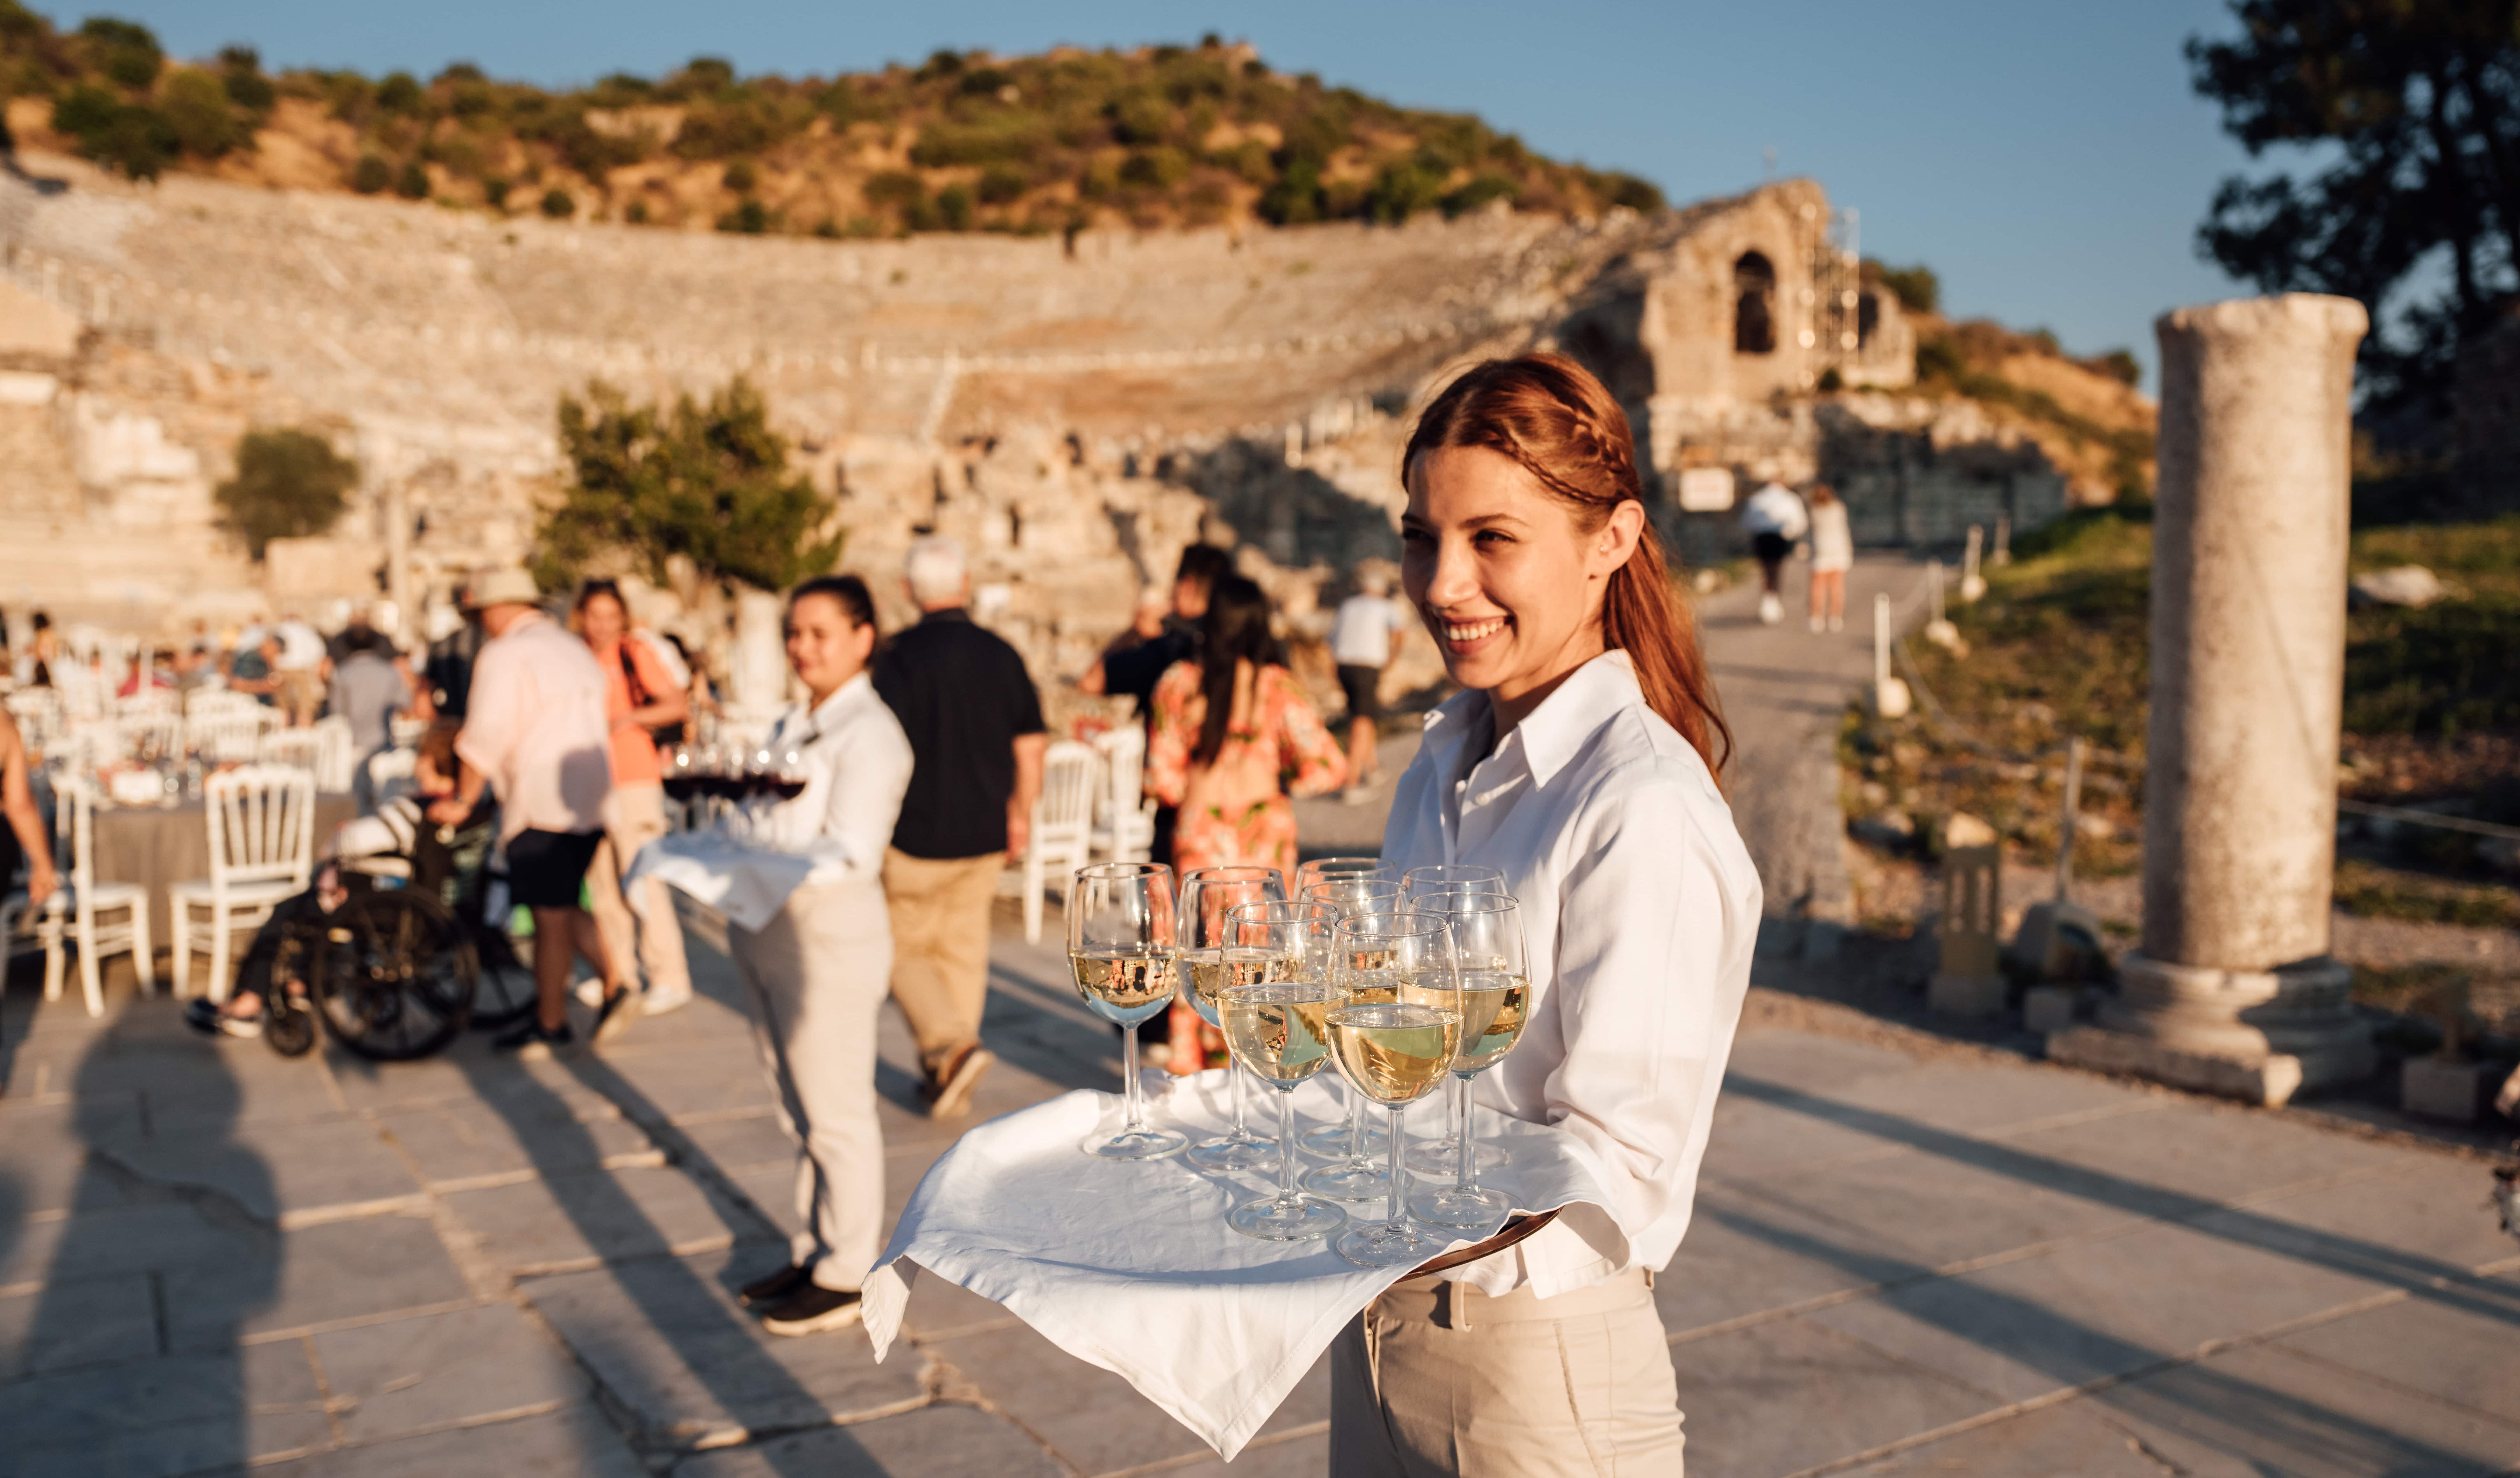 An ‘Evening at Ephesus’ with Seabourn